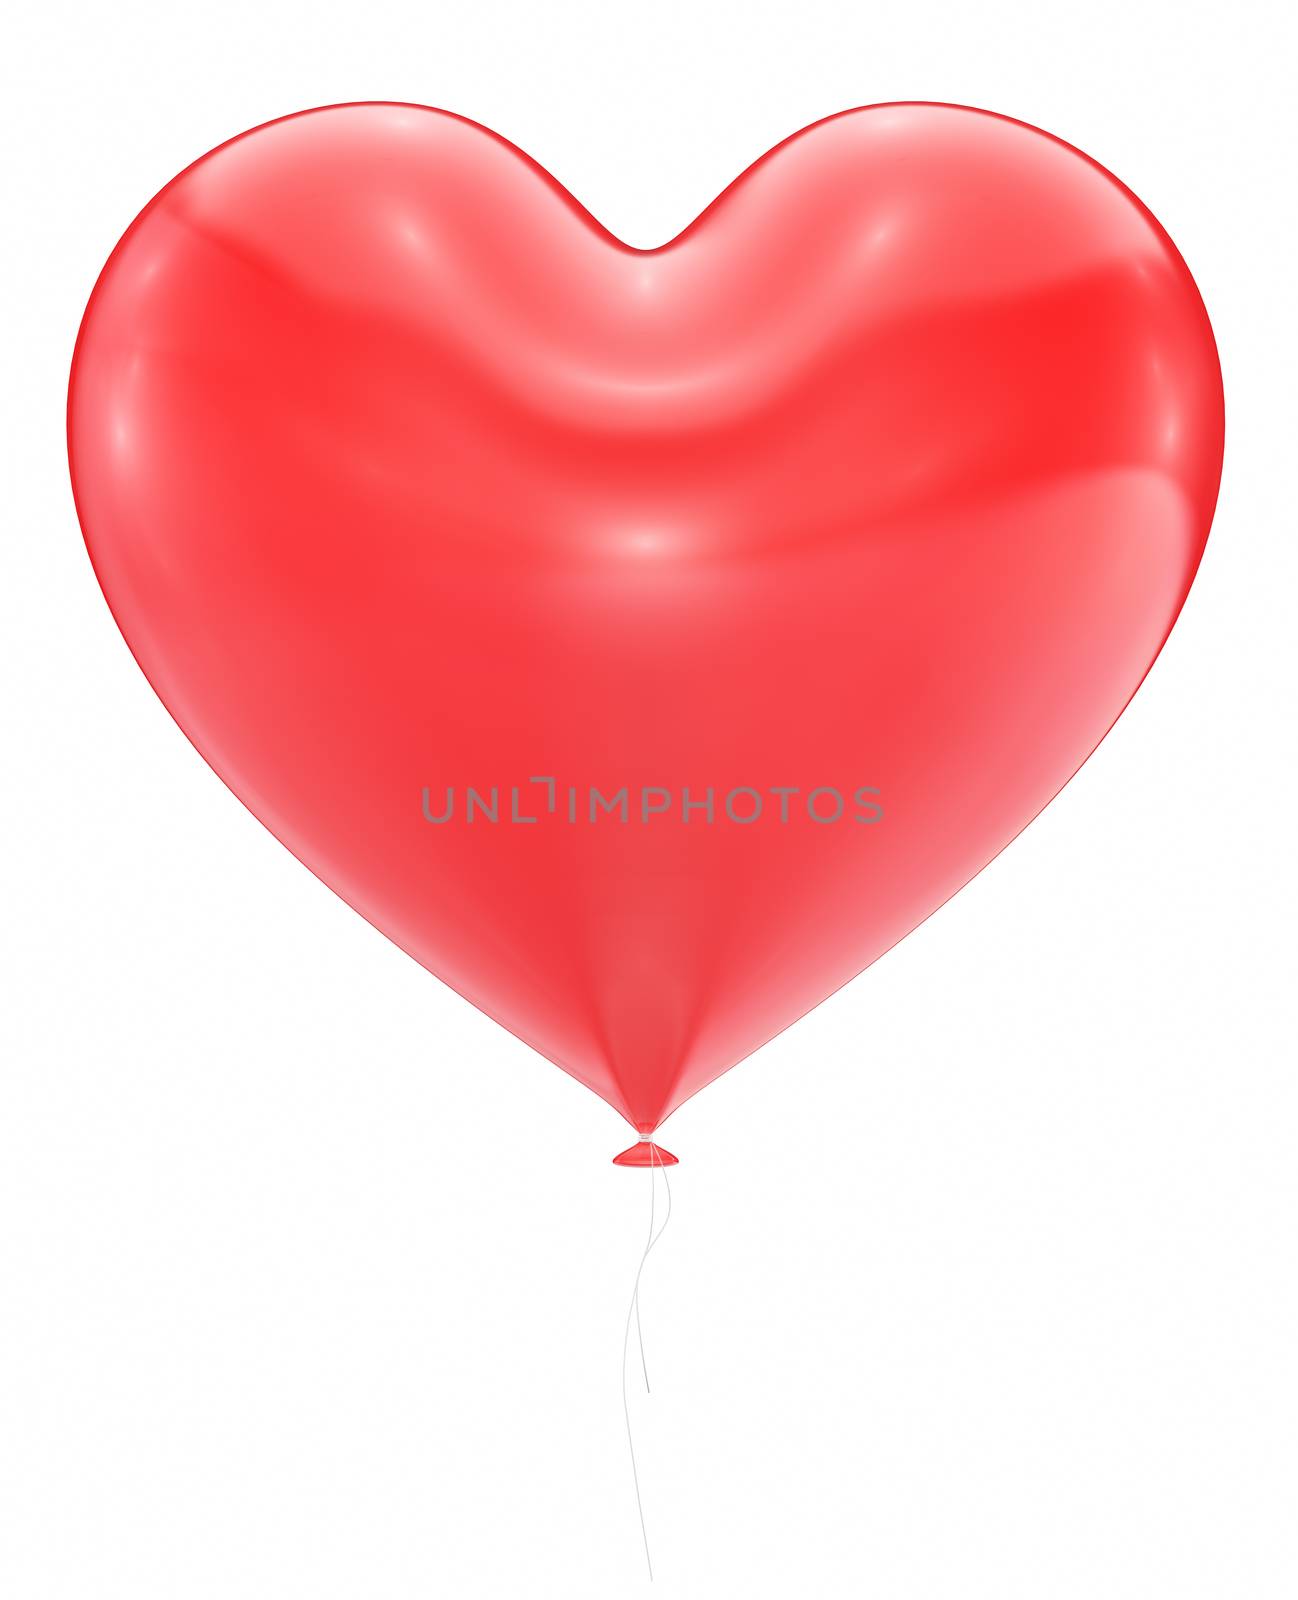 Big Red Heart Balloon Isolated On White Background